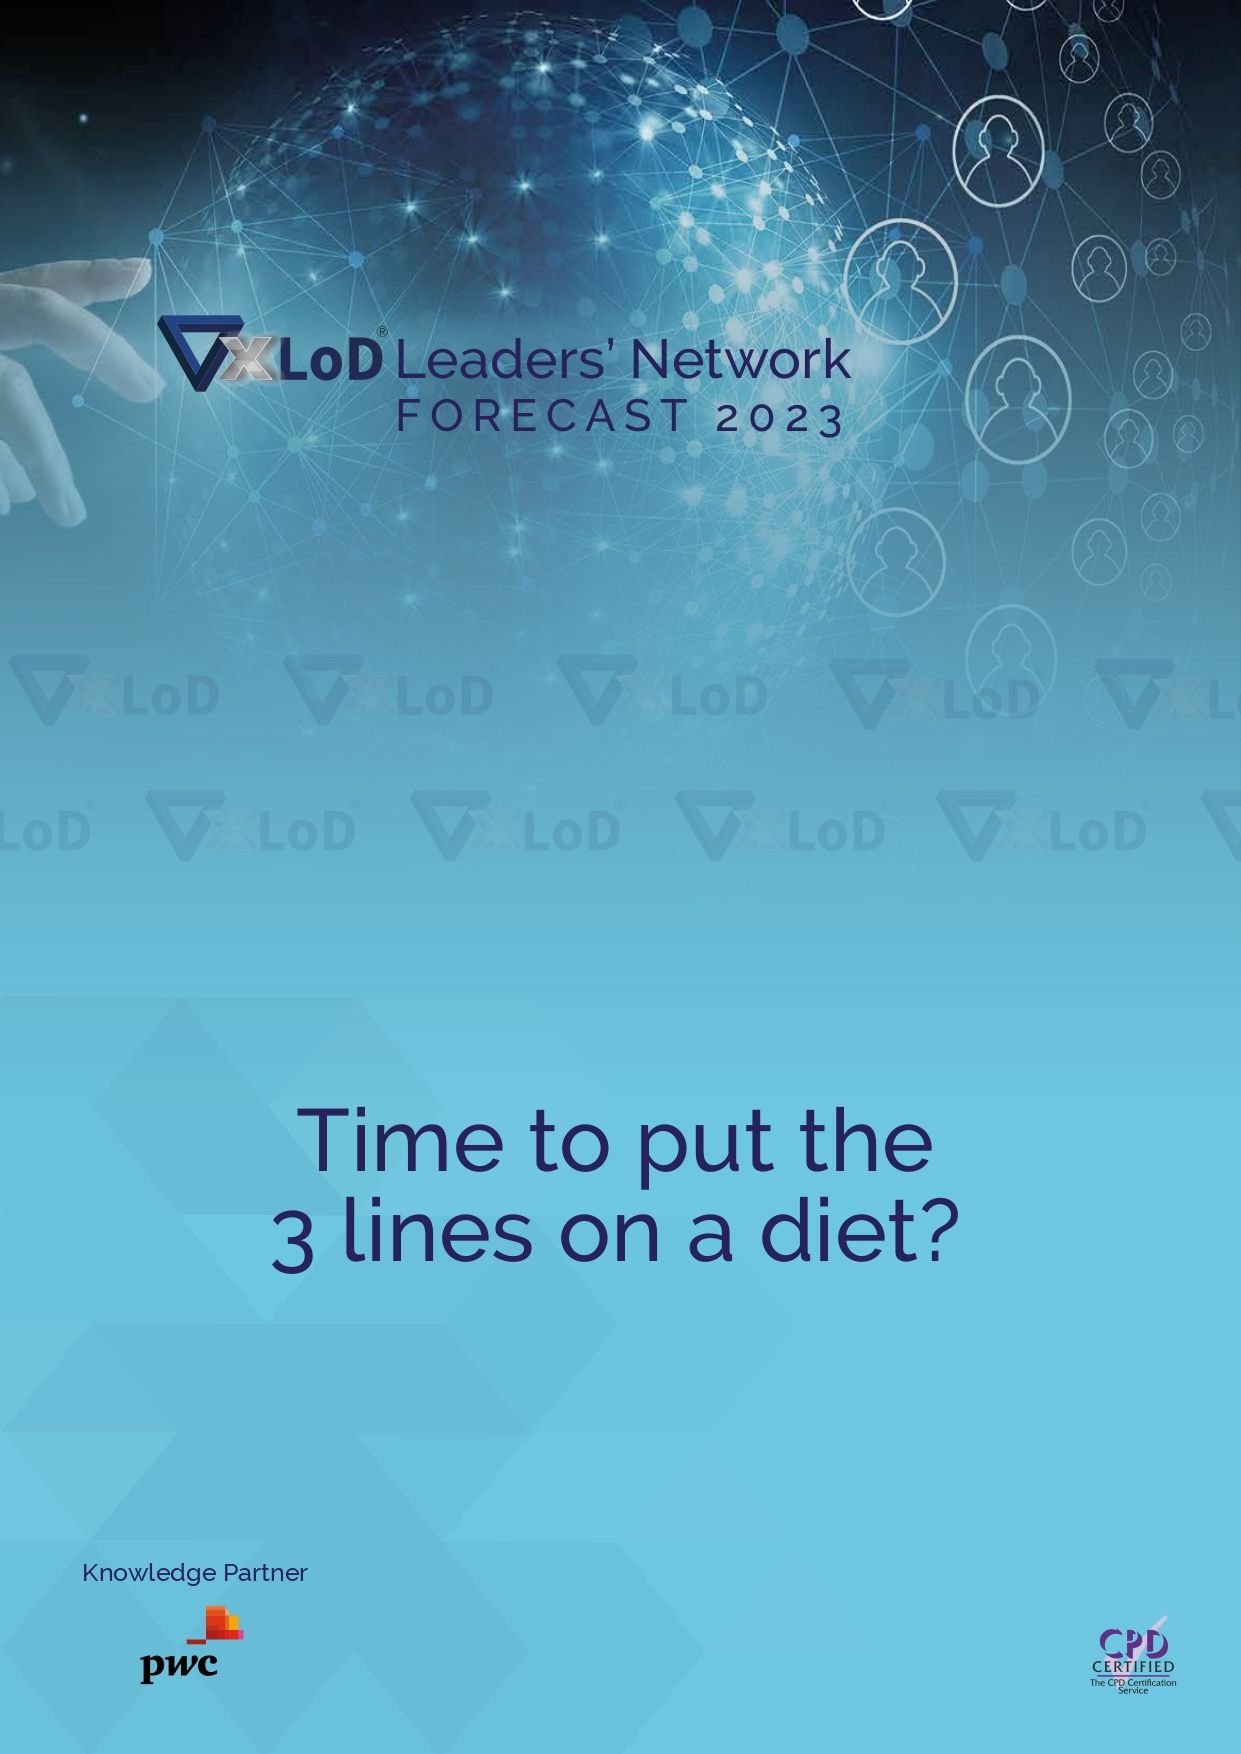 Time to put the 3 lines on a diet?